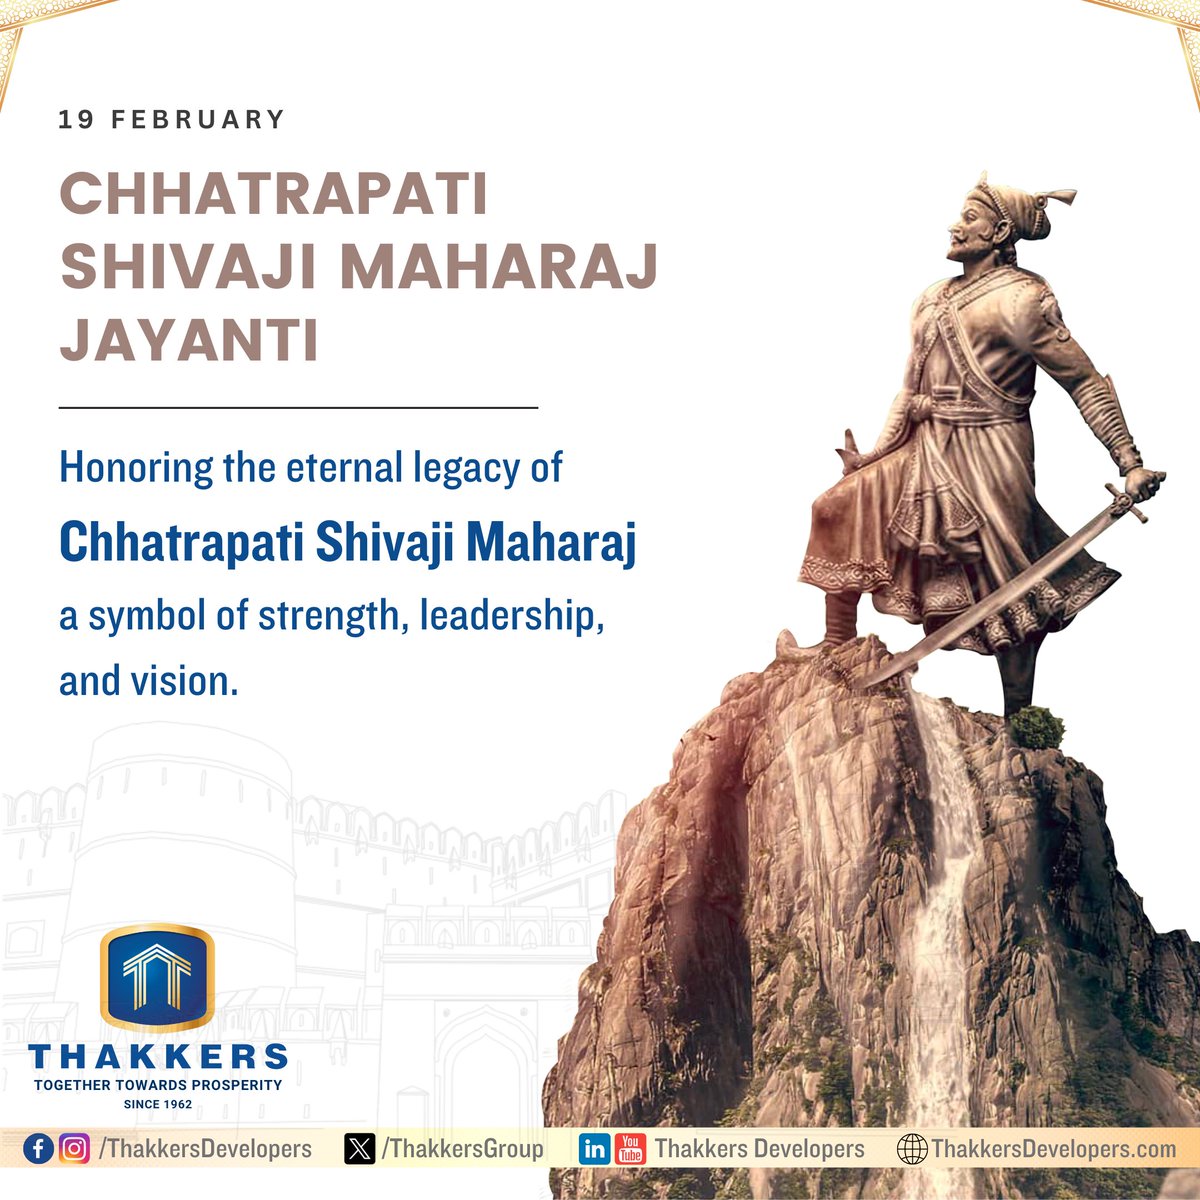 Thakkers Developers pays tribute to the indomitable spirit of Chhatrapati Shivaji Maharaj on his Jayanti. His legacy of courage, leadership & vision inspires us in building a future anchored in strength & integrity.
#ShivajiMaharajJayanti #ThakkersDevelopers #LegacyOfLeadership